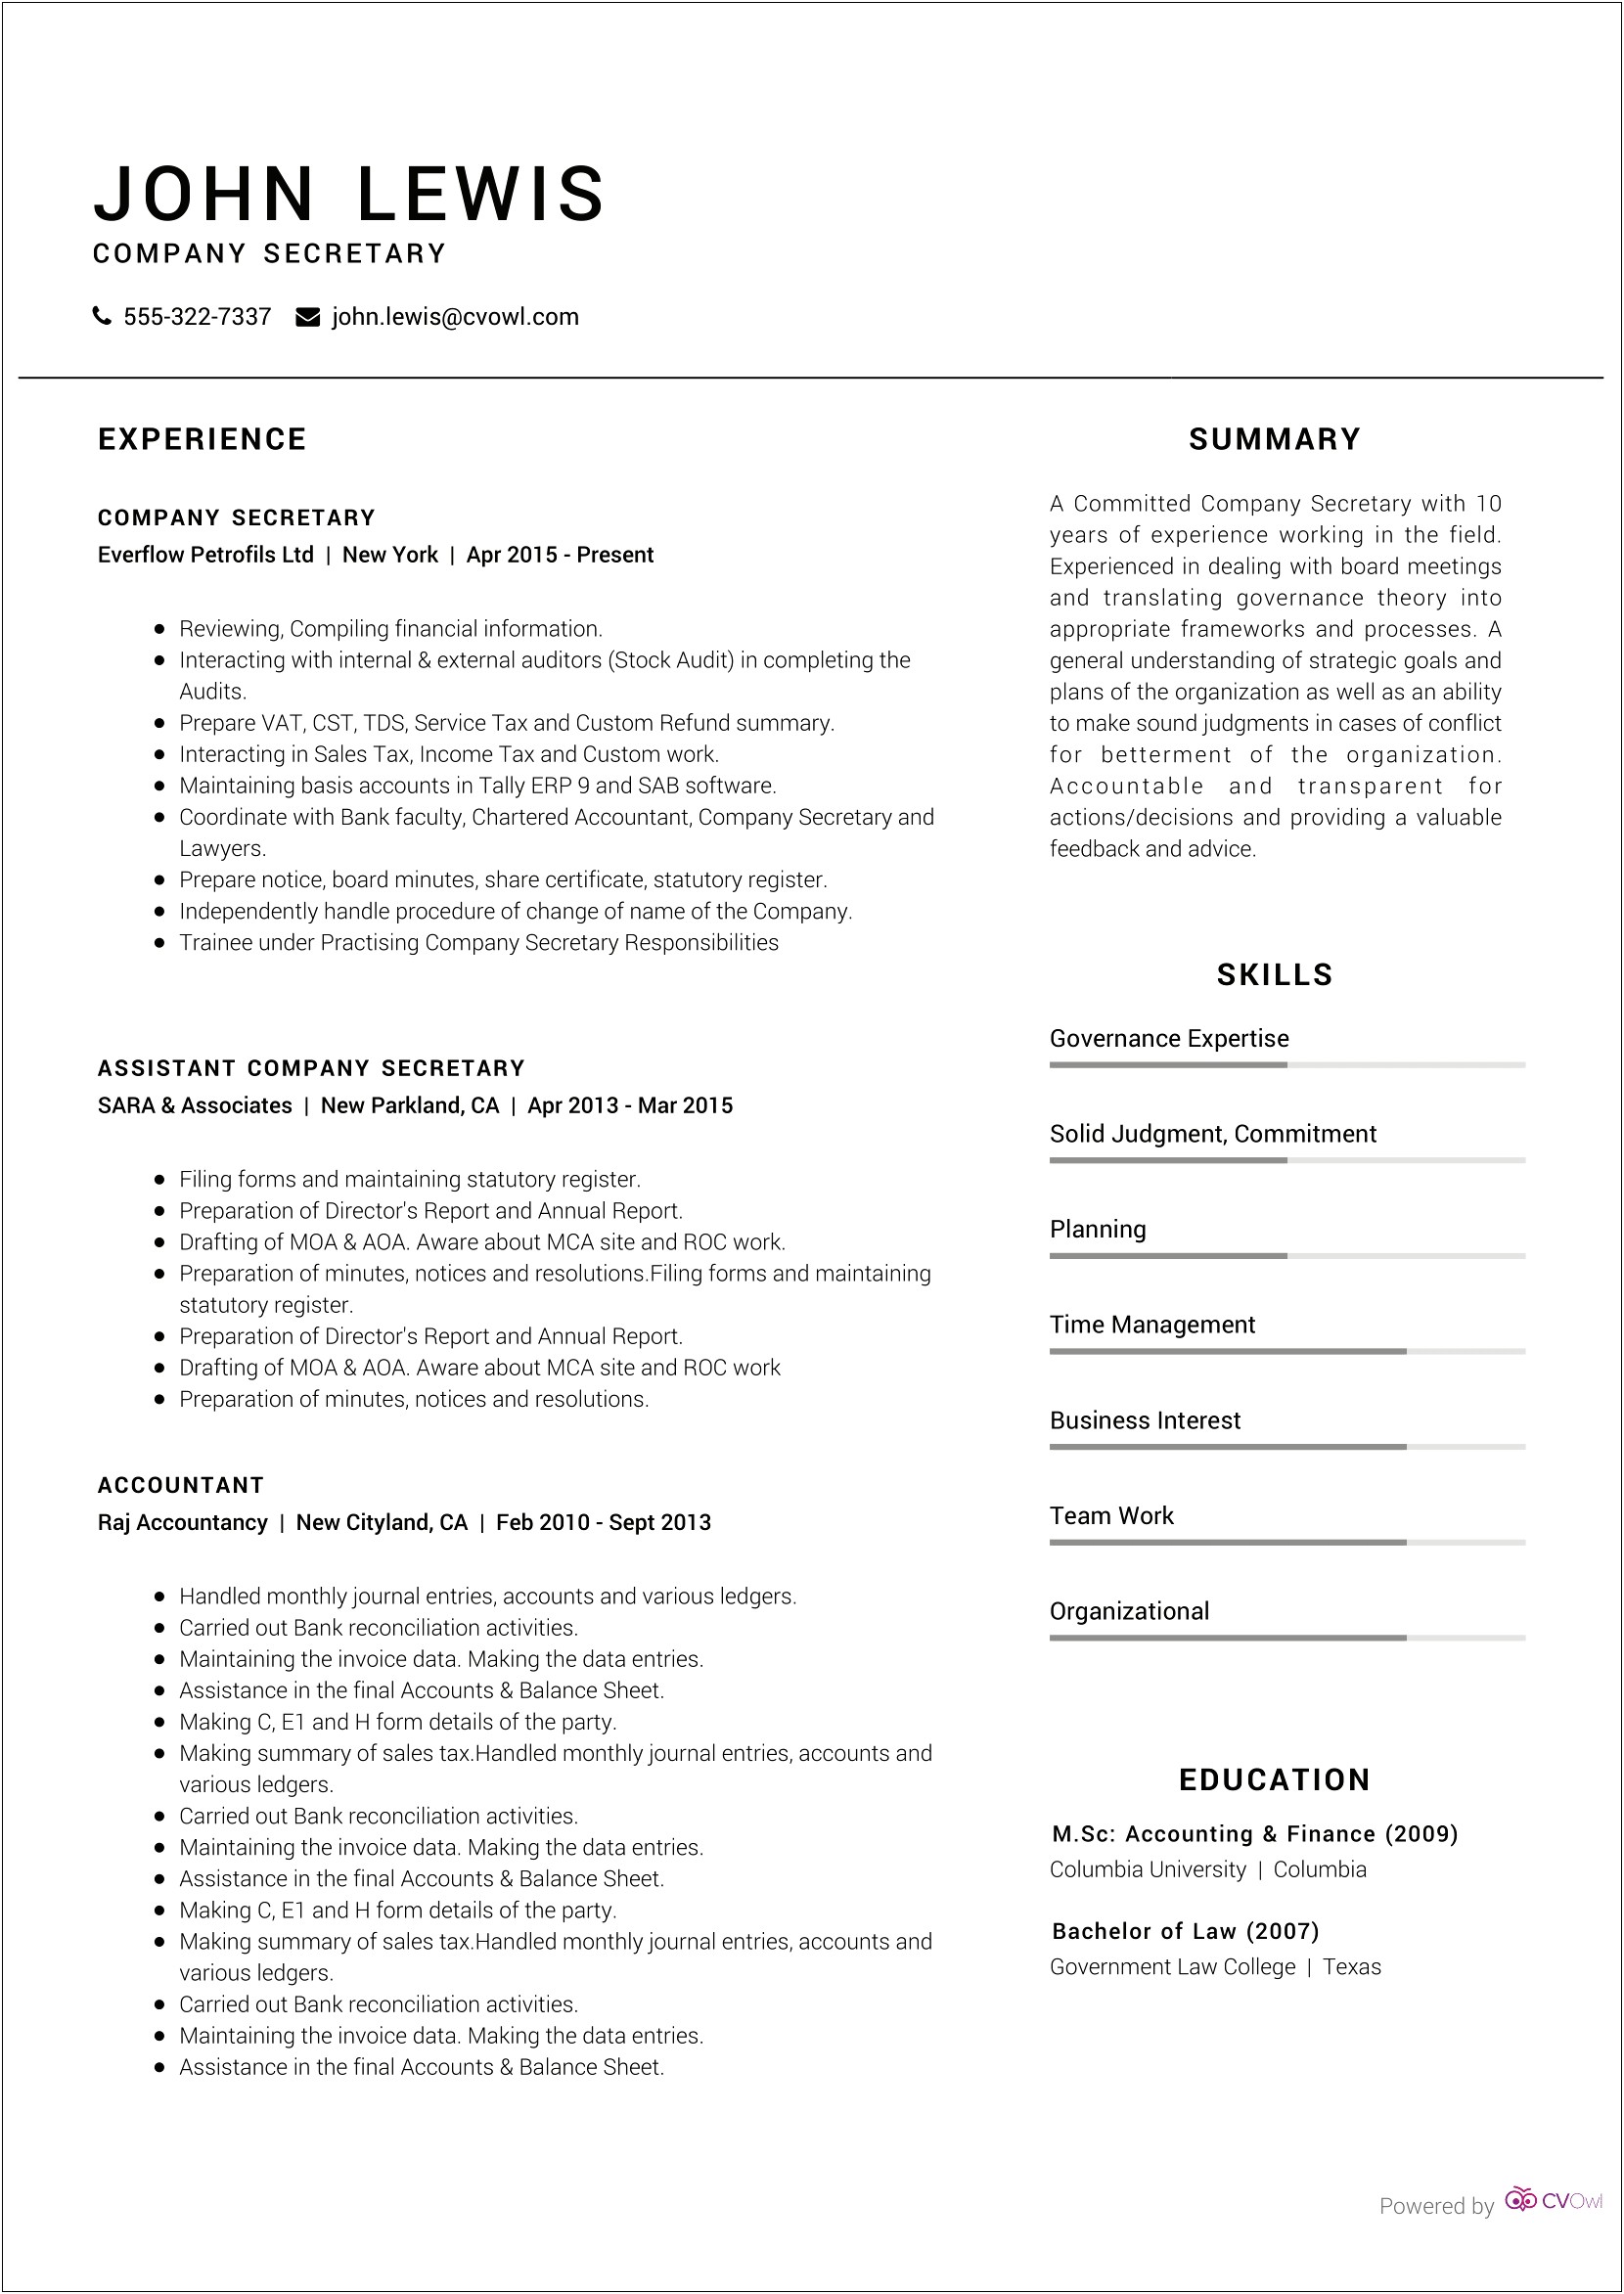 Resume Format For Legal Jobs In India